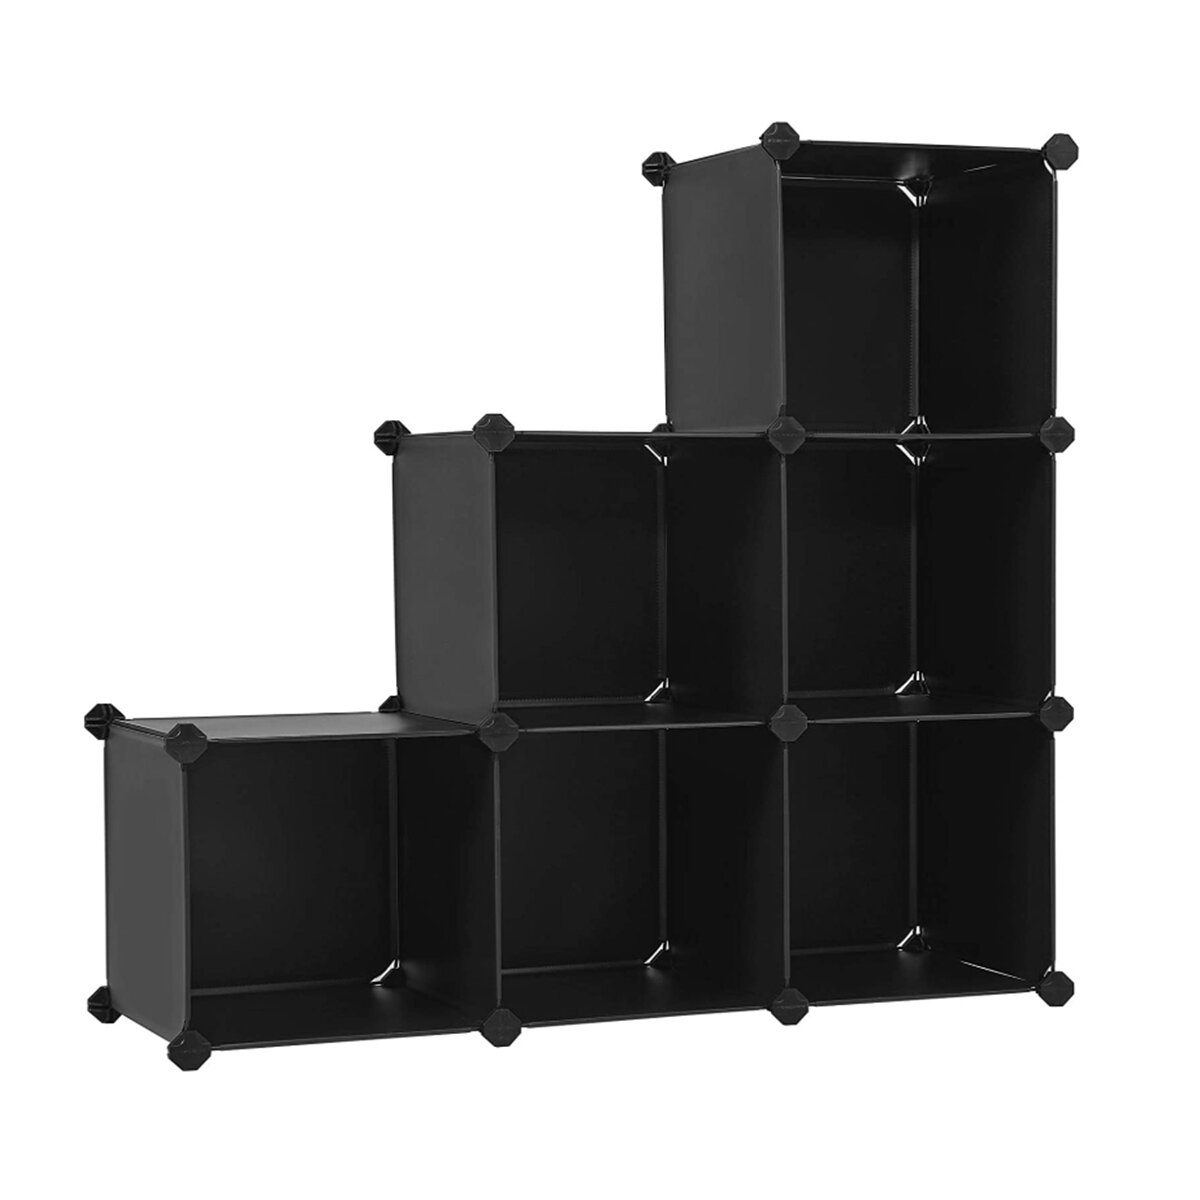 3 Tier Childrens Free Combination Bookshelf Simple and Modern Style for Home Office